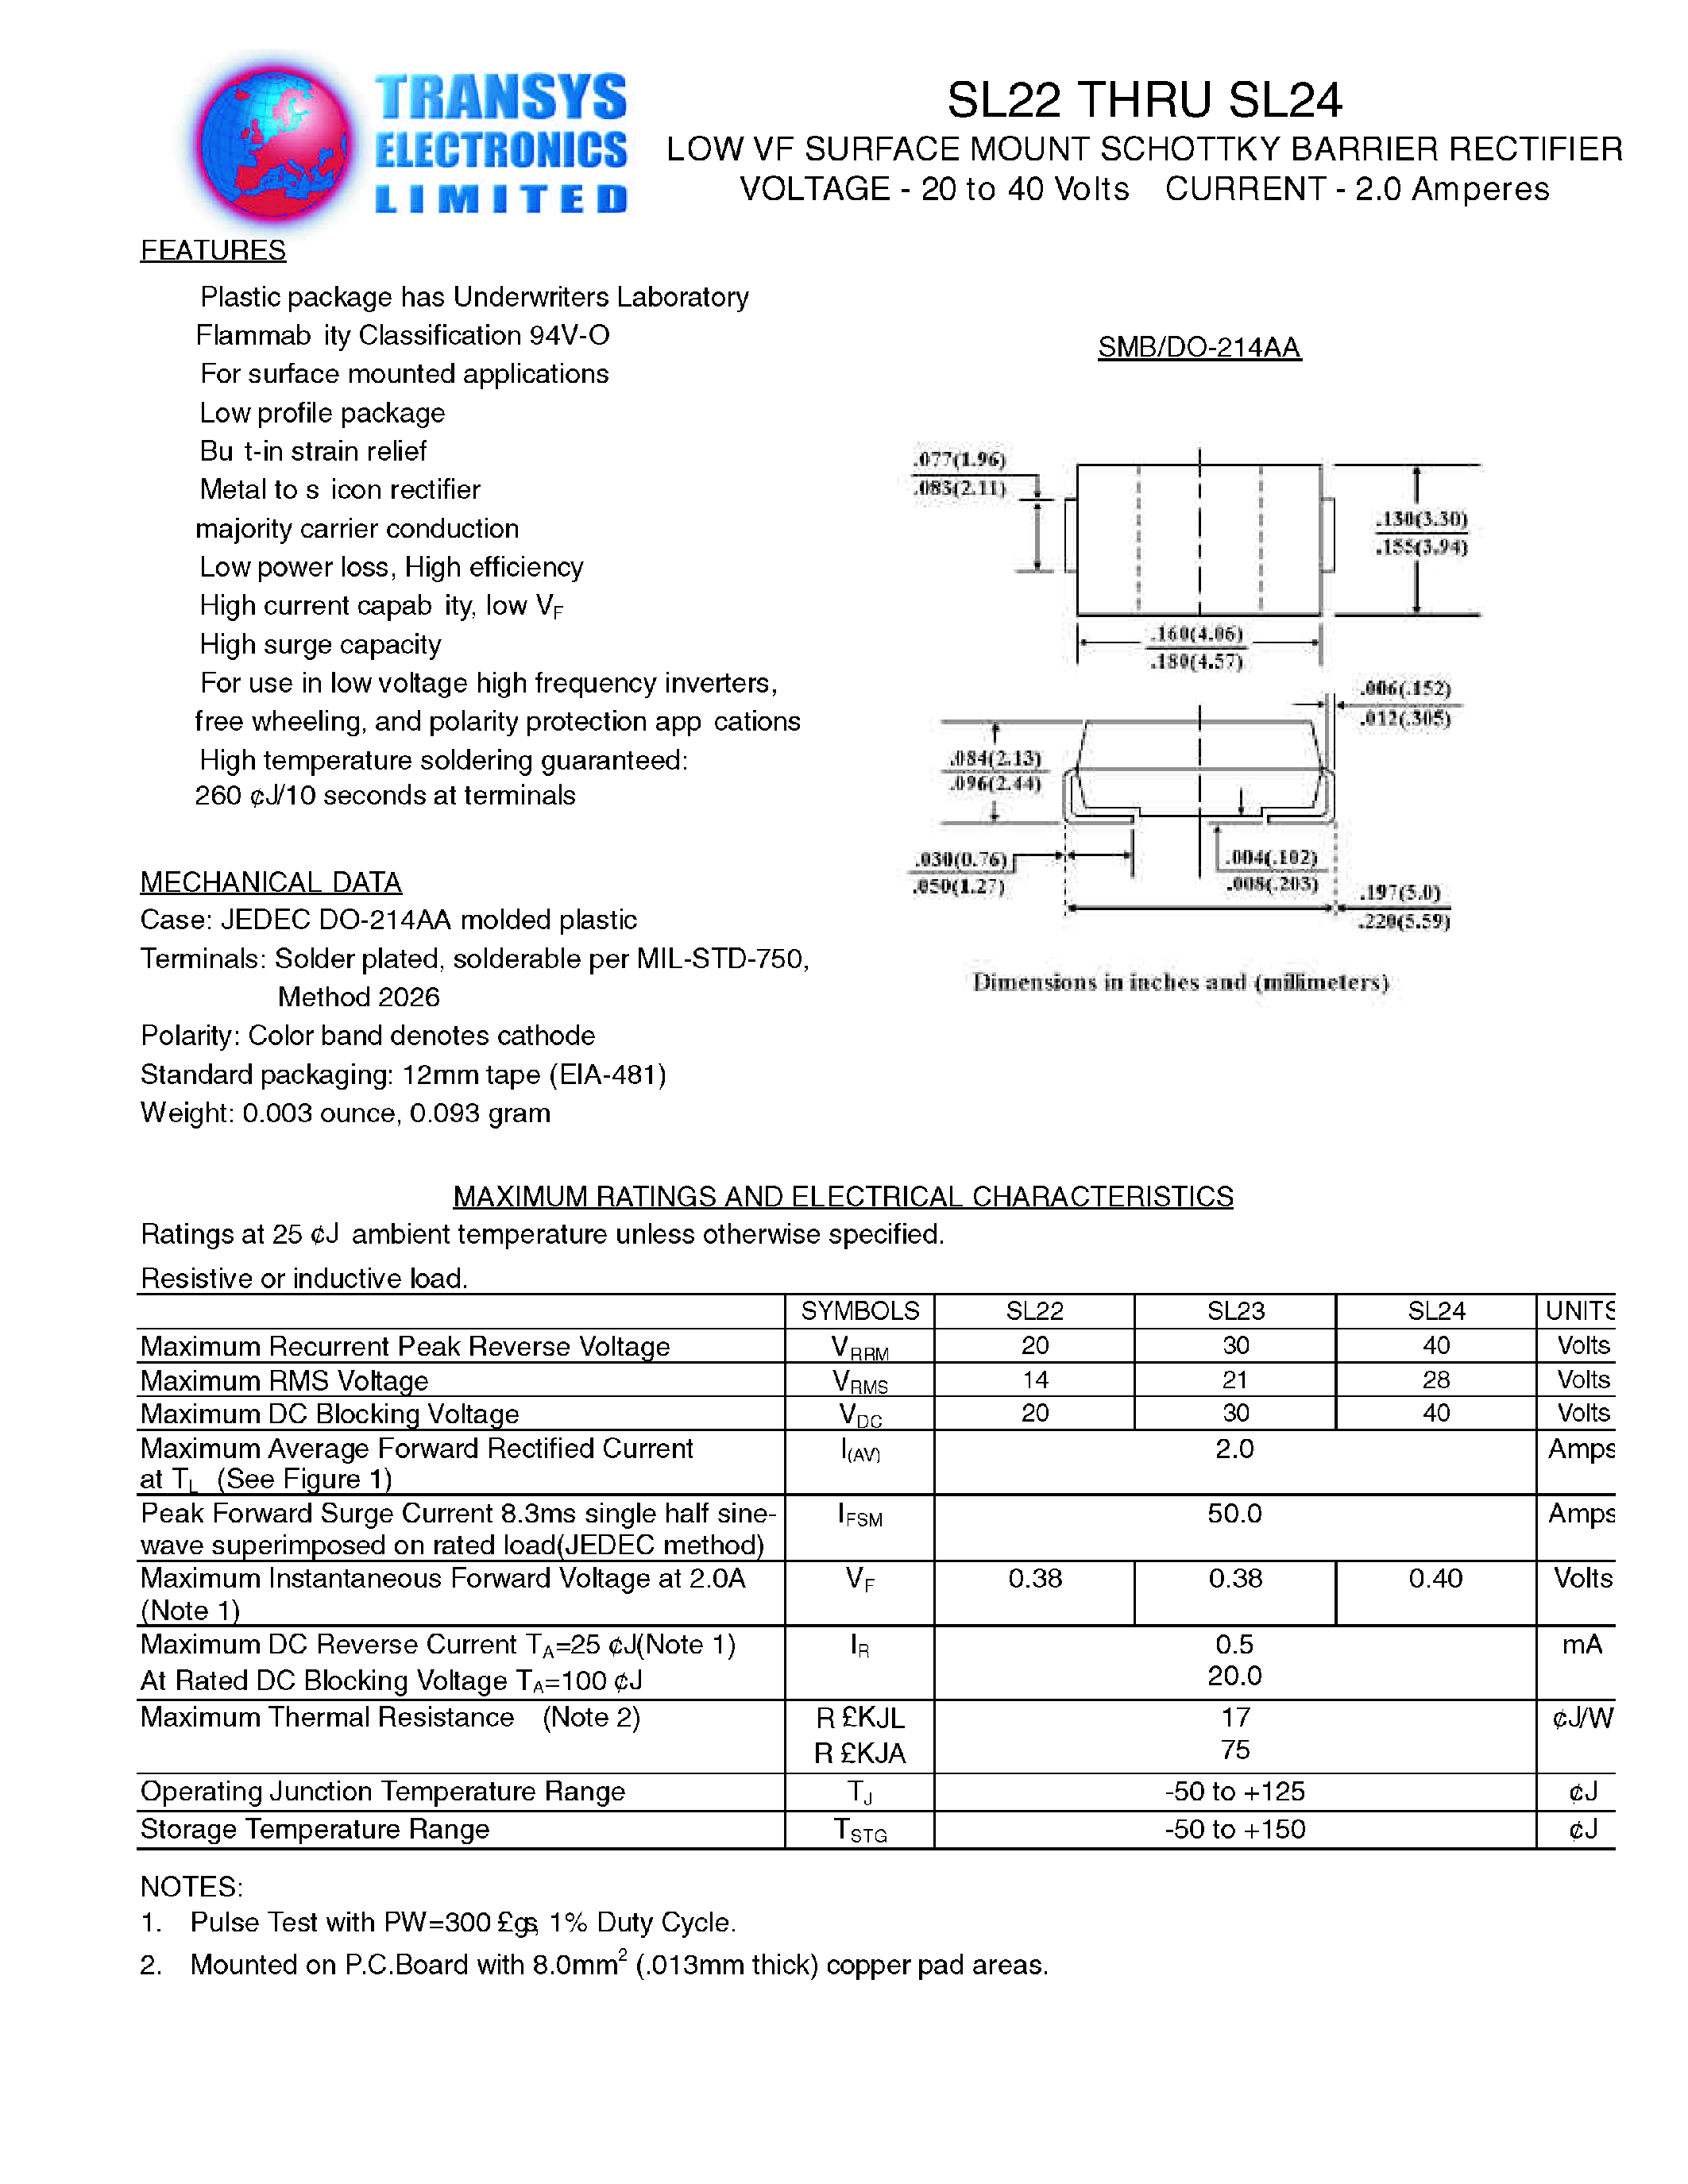 Datasheet SL22 - LOW VF SURFACE MOUNT SCHOTTKY BARRIER RECTIFIER page 1